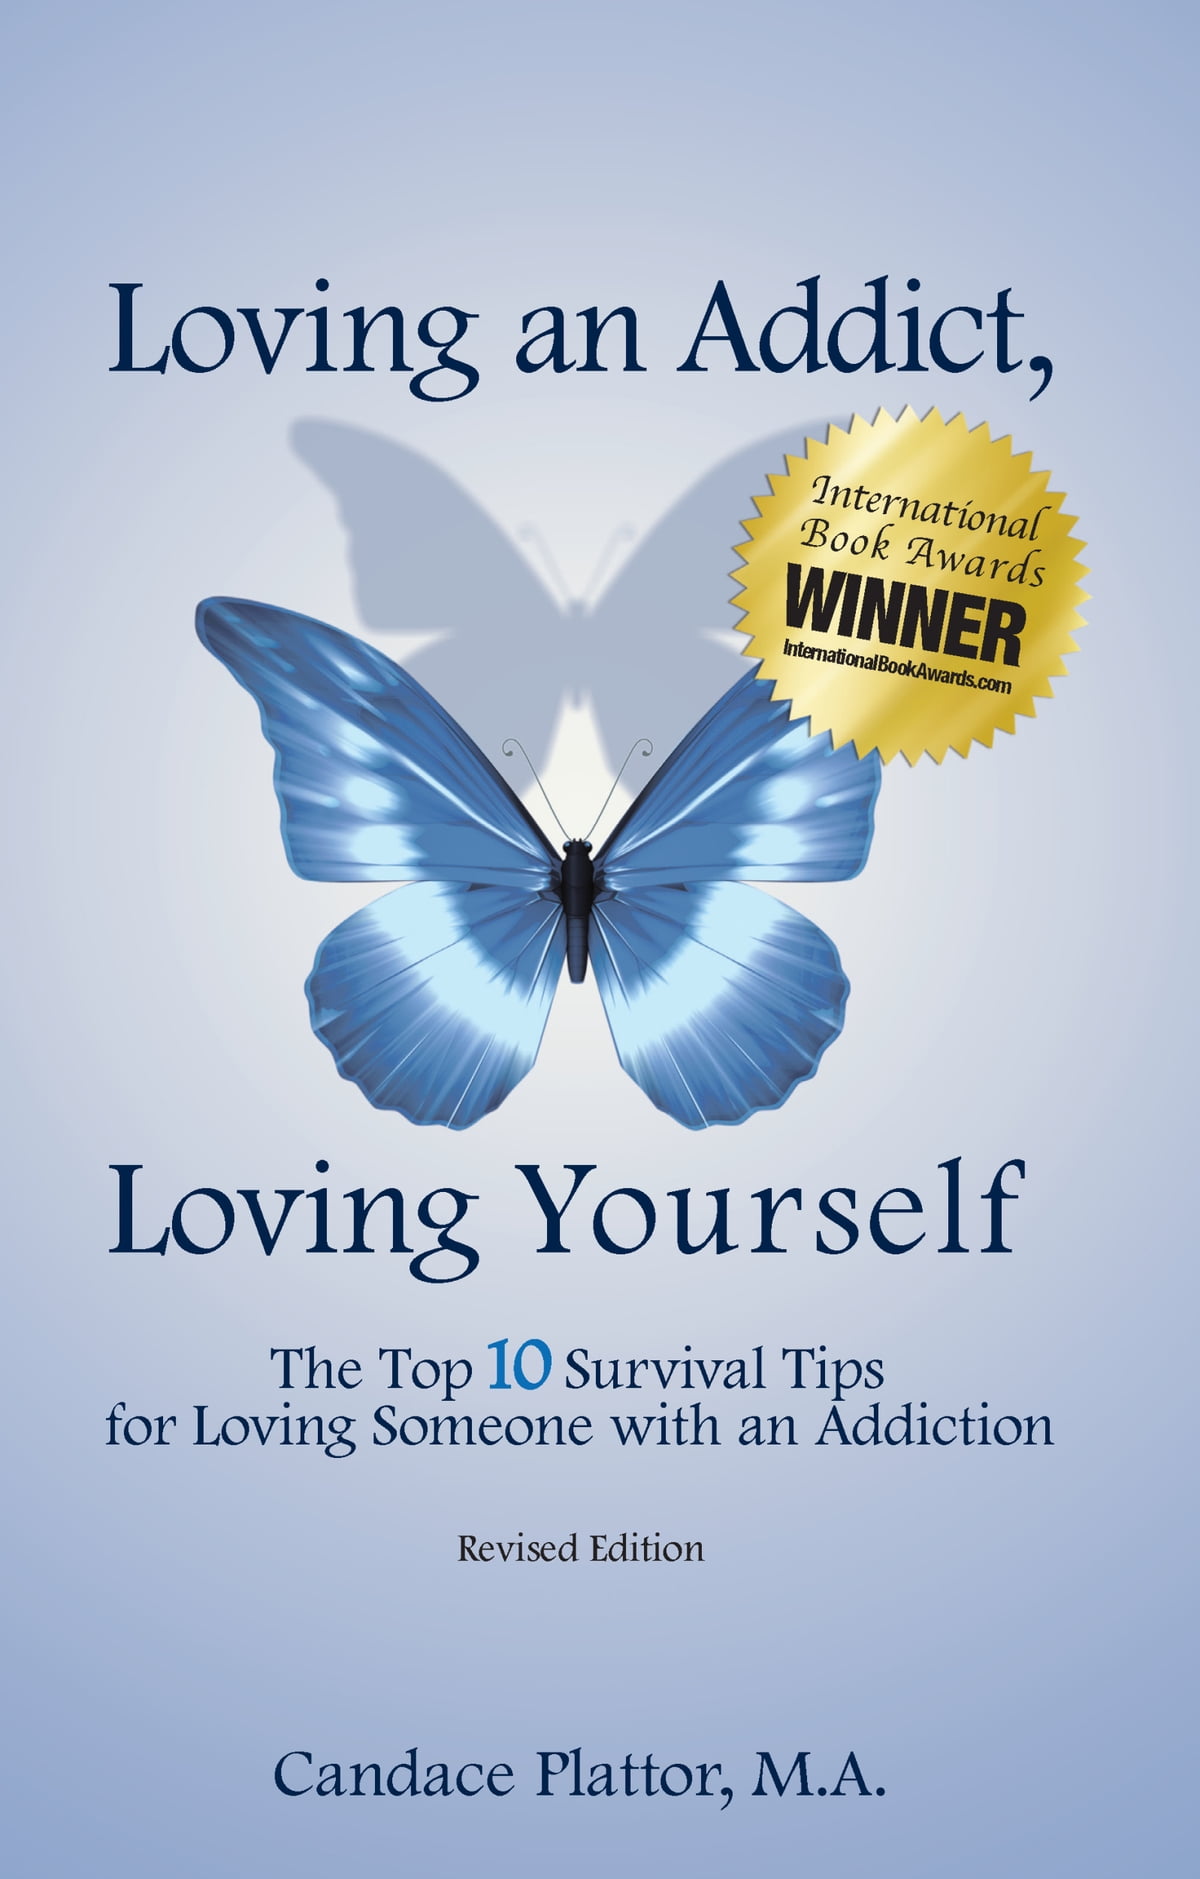 The cover of the book Loving an Addict, Loving Yourself by Candace Plattor